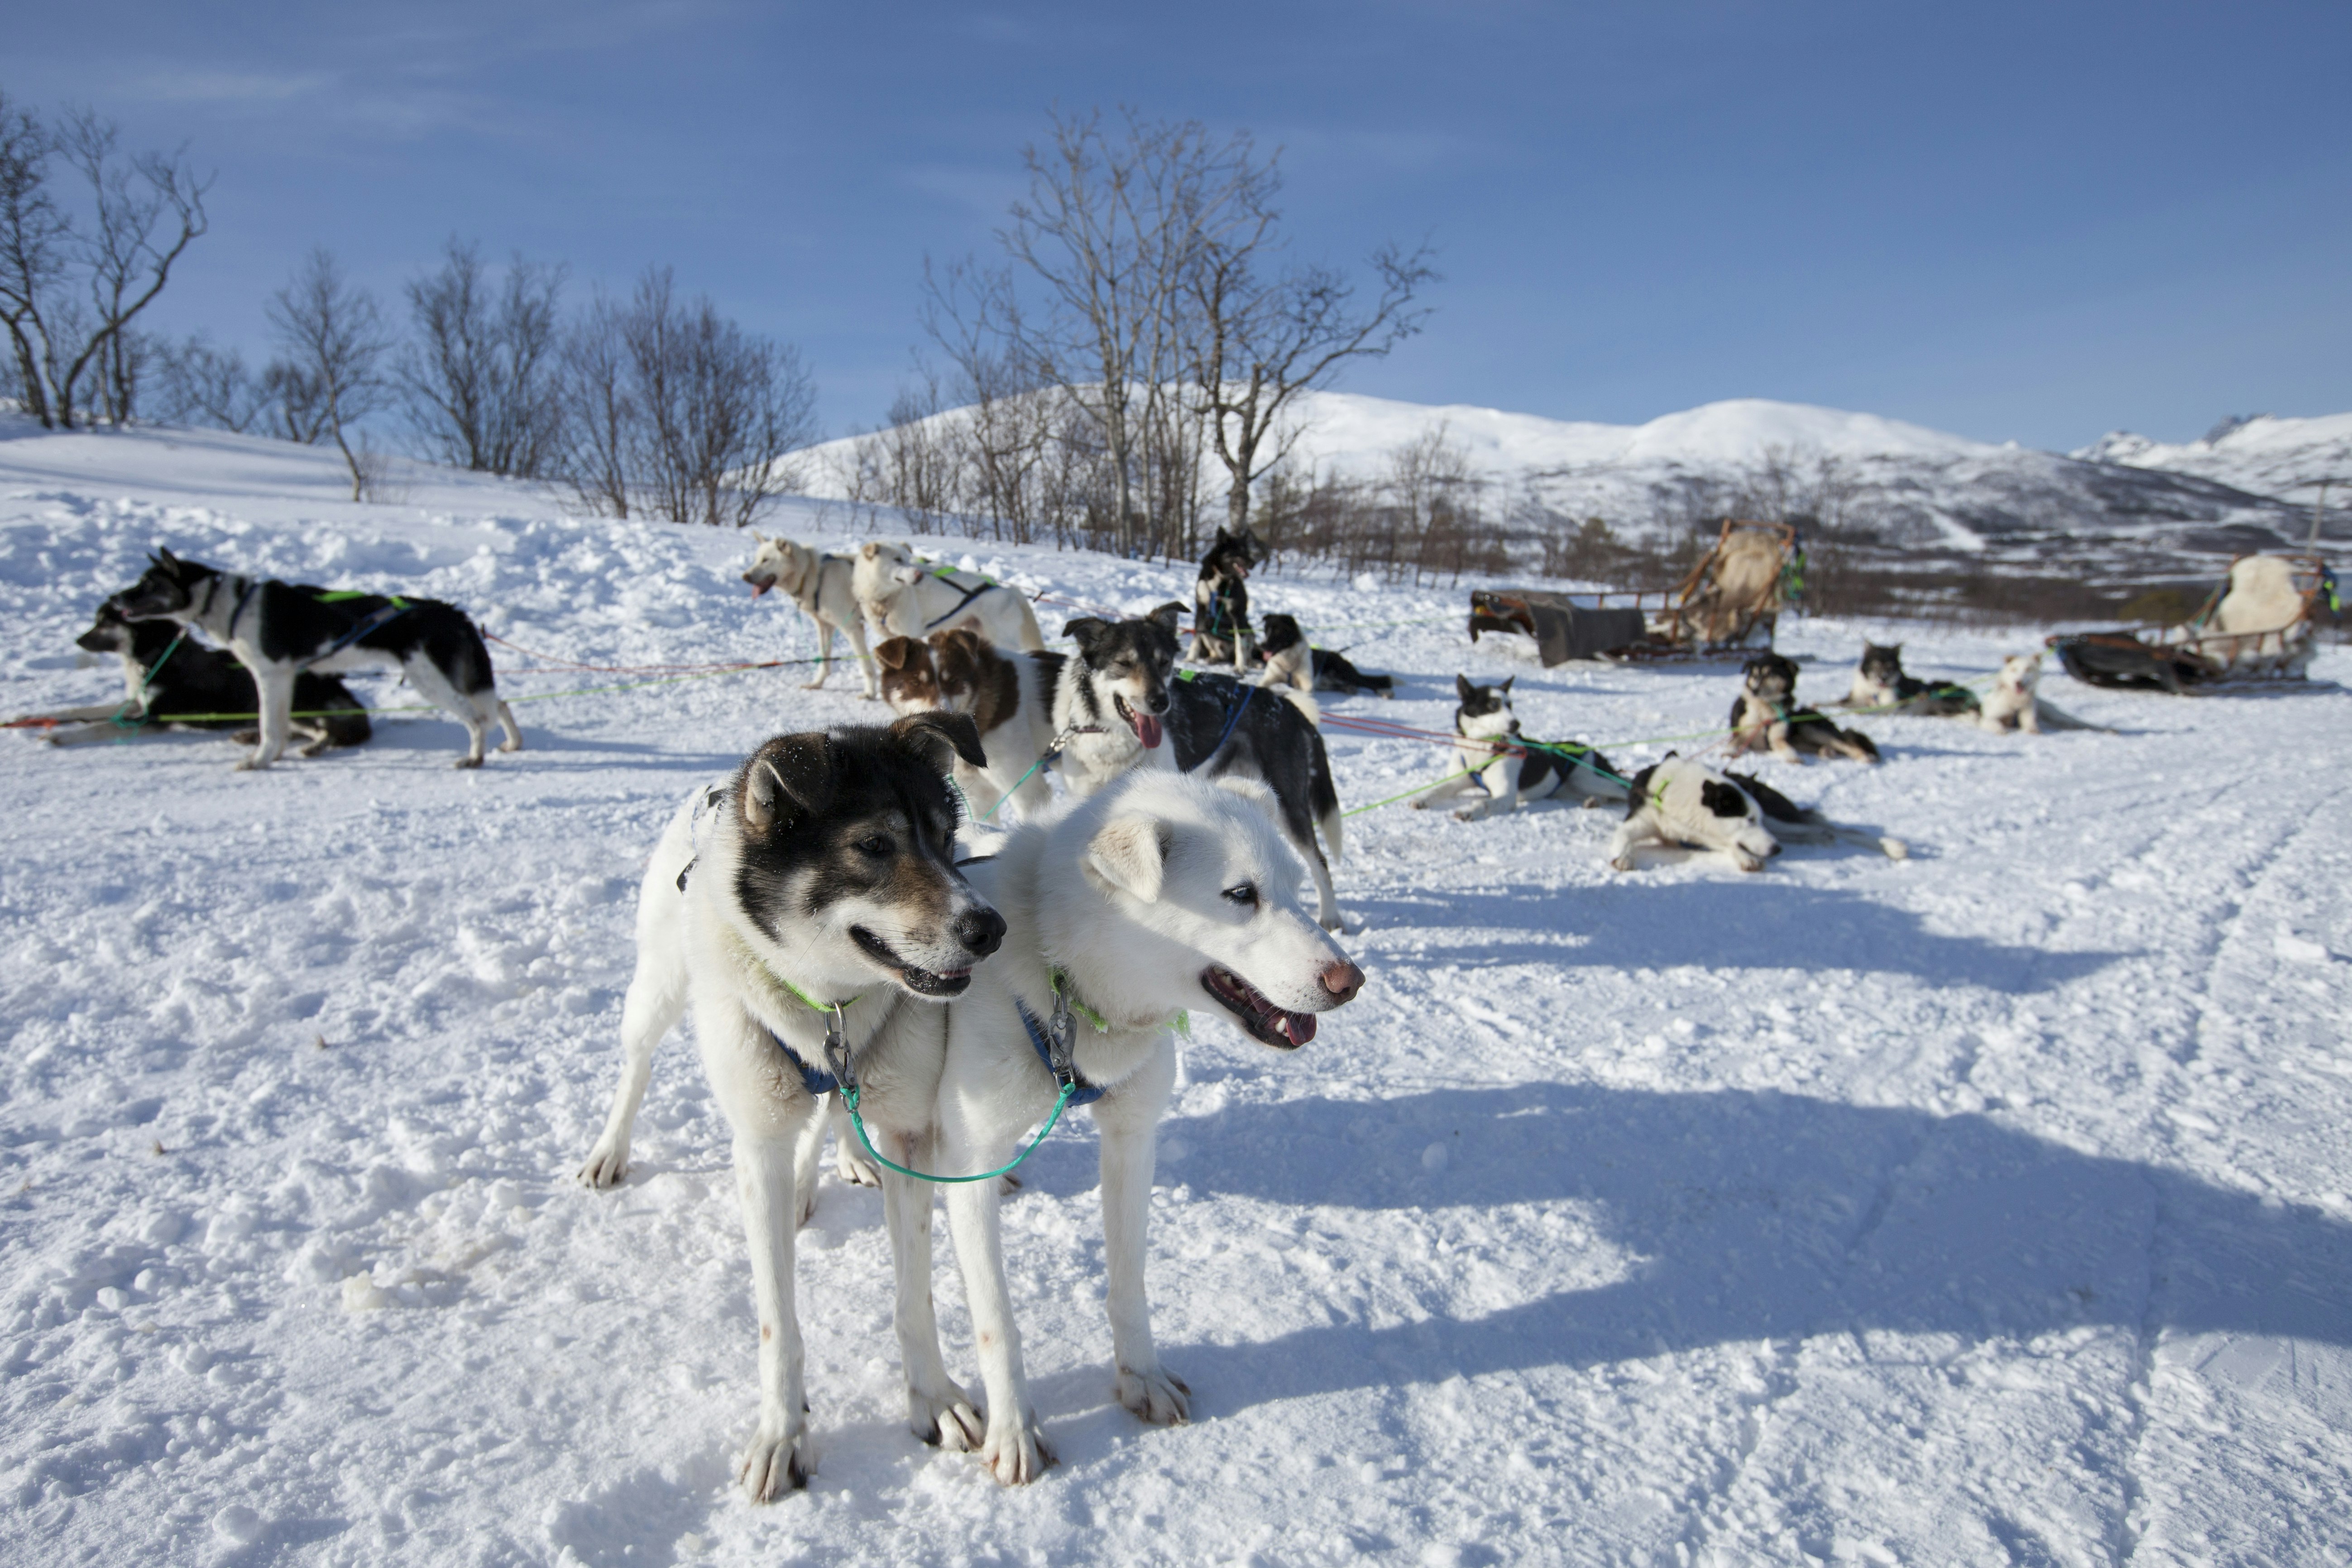 A group of dogs, some standing, others laying on the snow-covered field look around while still attached to an empty sled in the background